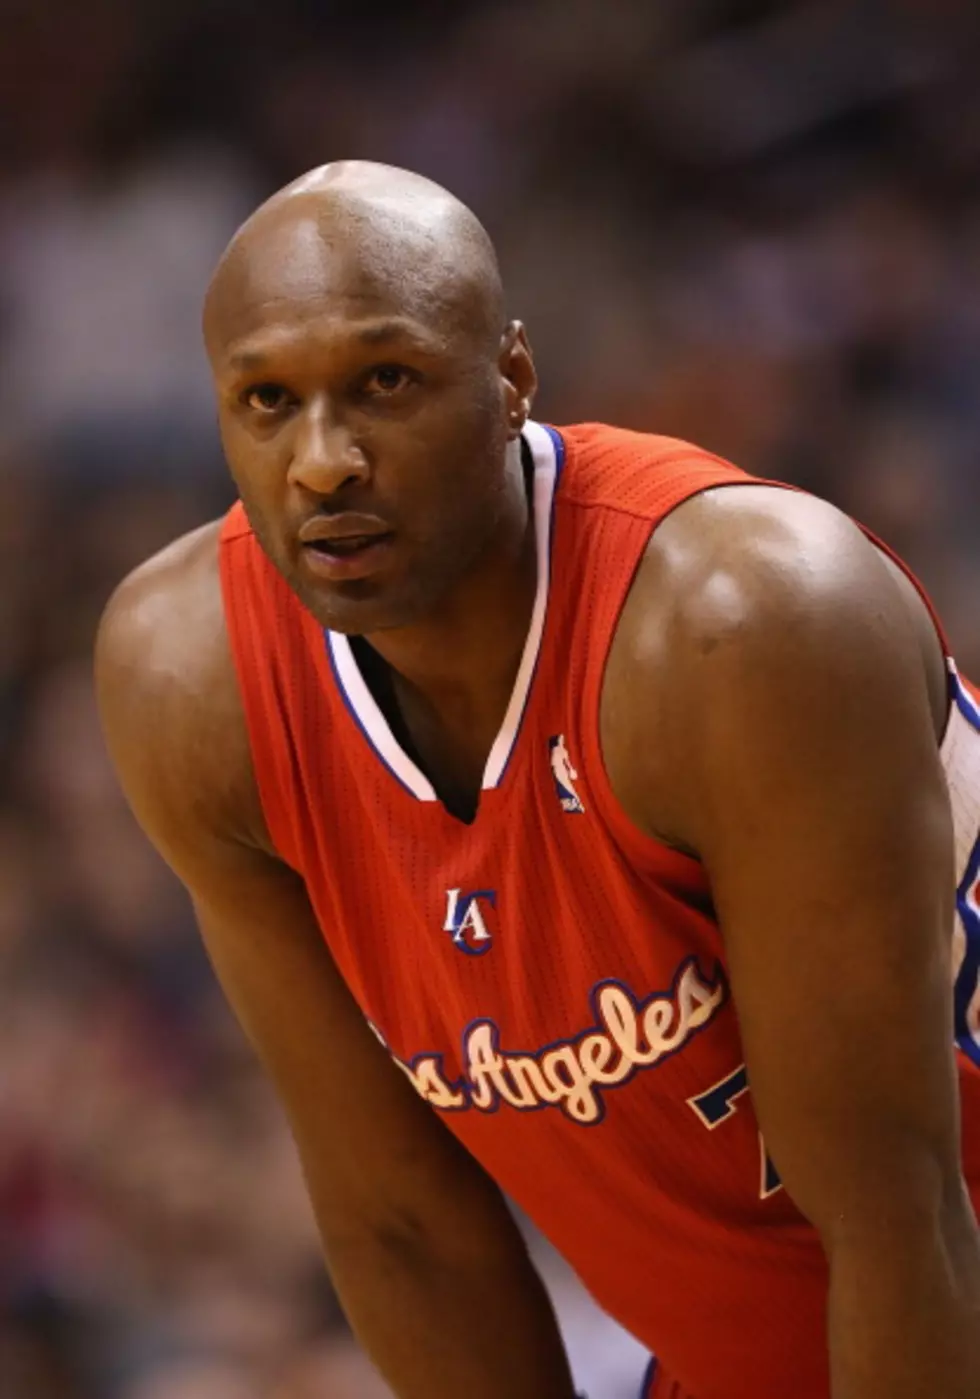 Latest On Lamar Odom As He Fights For His Life &#8211; Tha Wire [VIDEO]